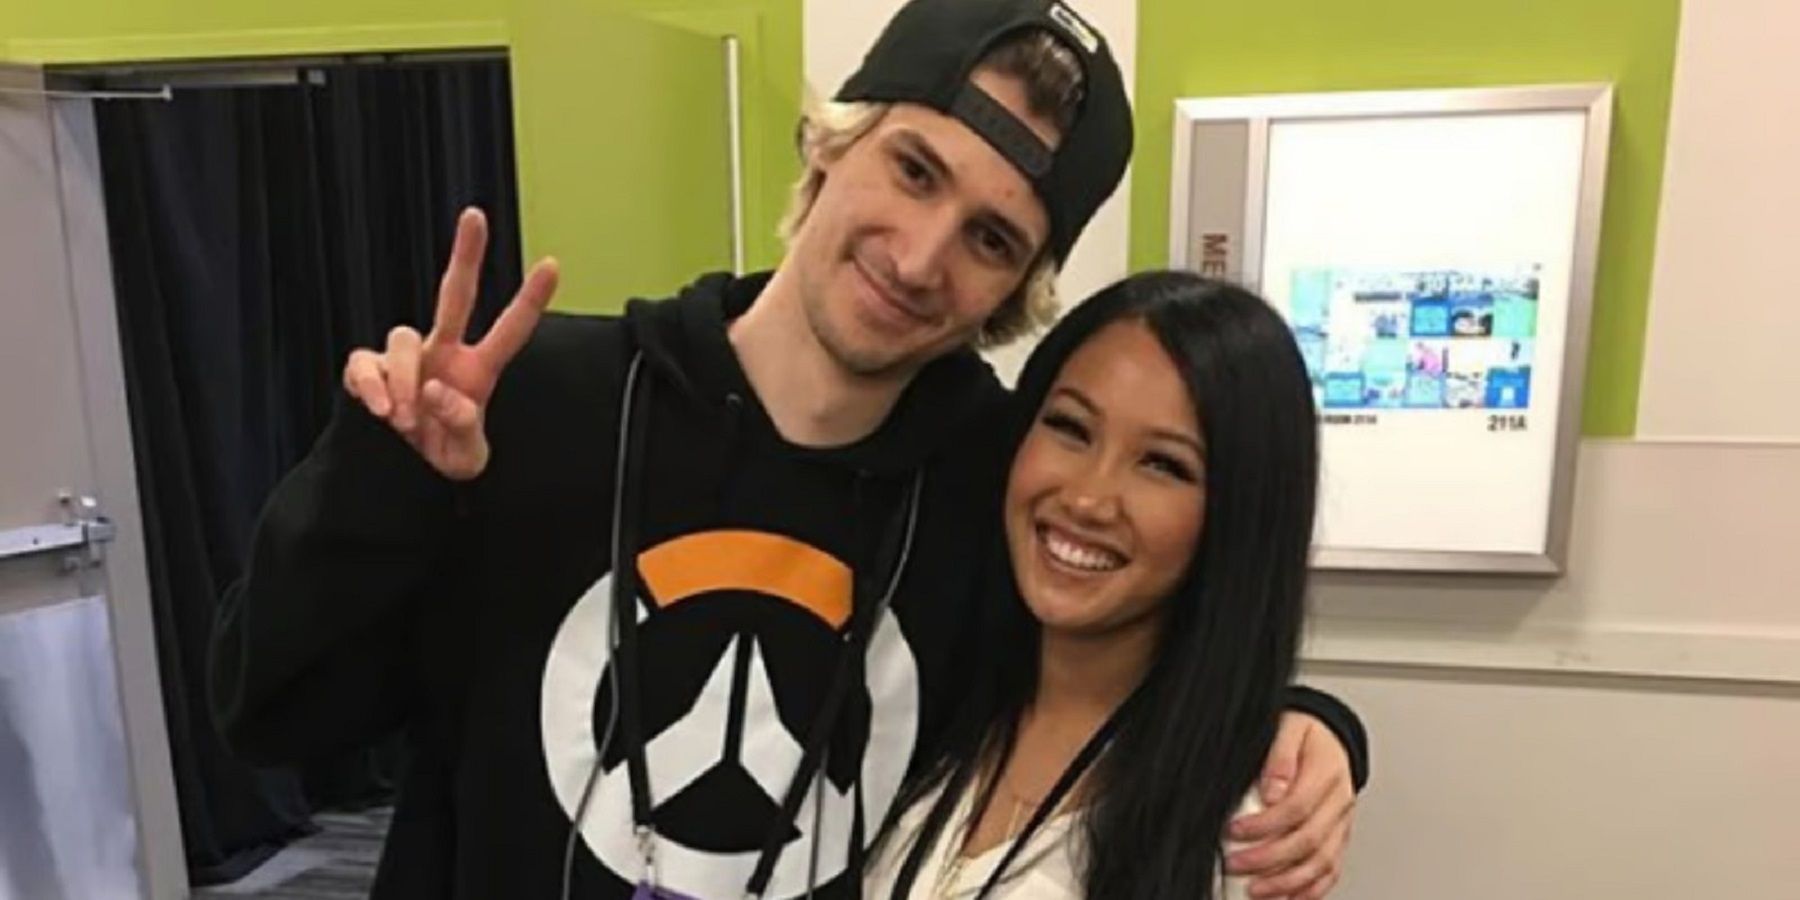 are xqc and adept together again